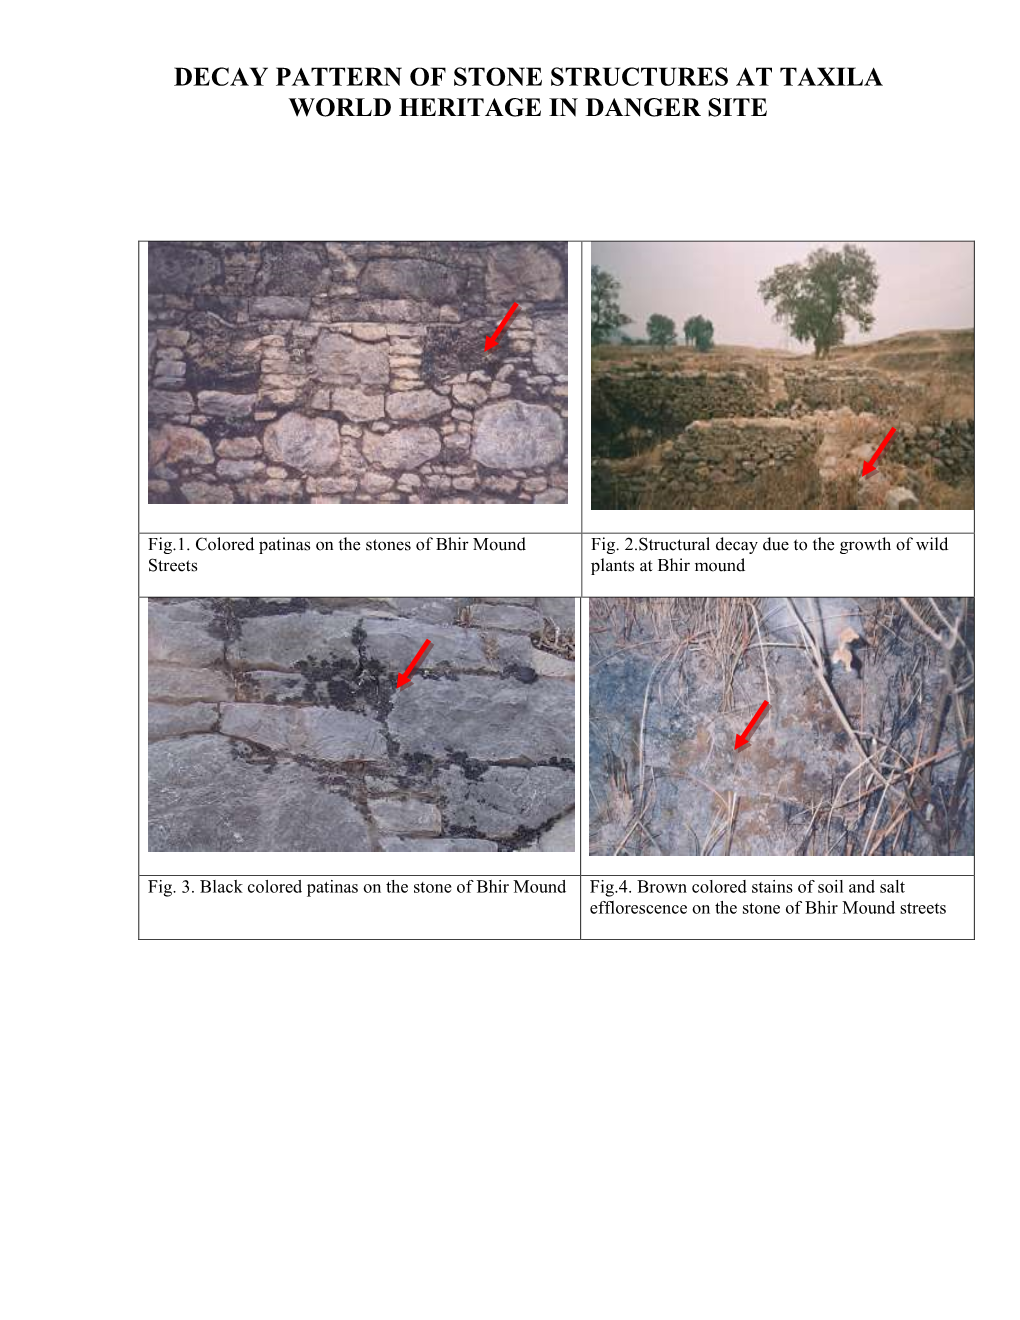 Decay Pattern of Stone Structures at Taxila World Heritage in Danger Site